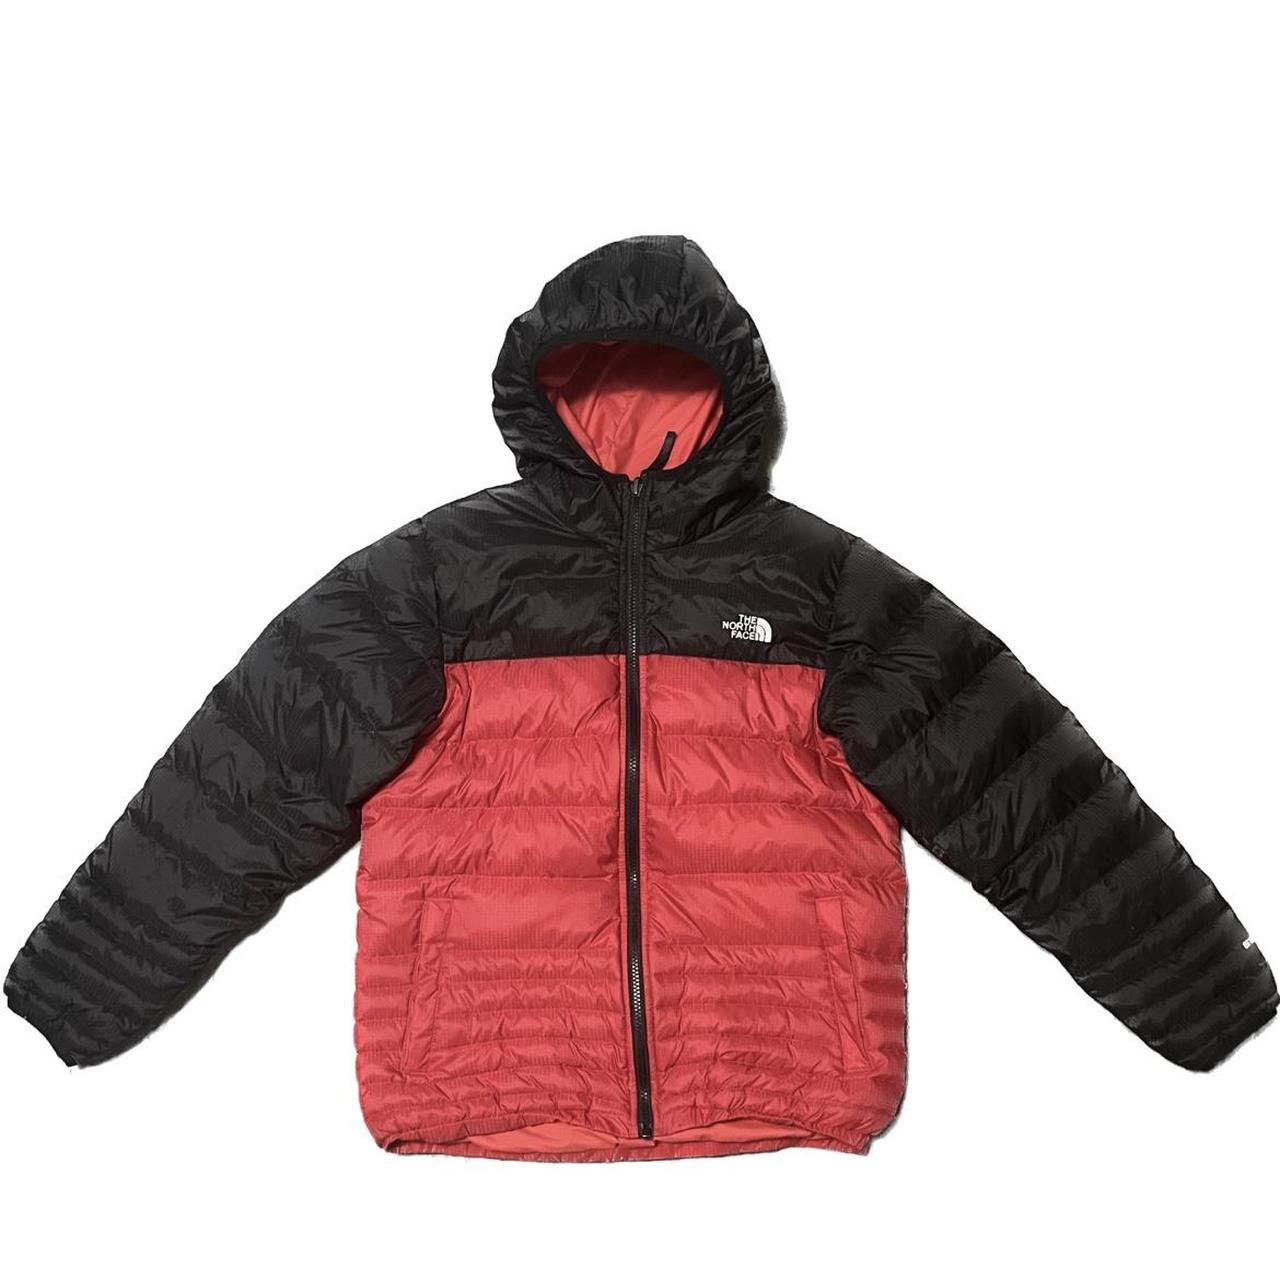 The North Face Invert-able puffer jacket - Depop